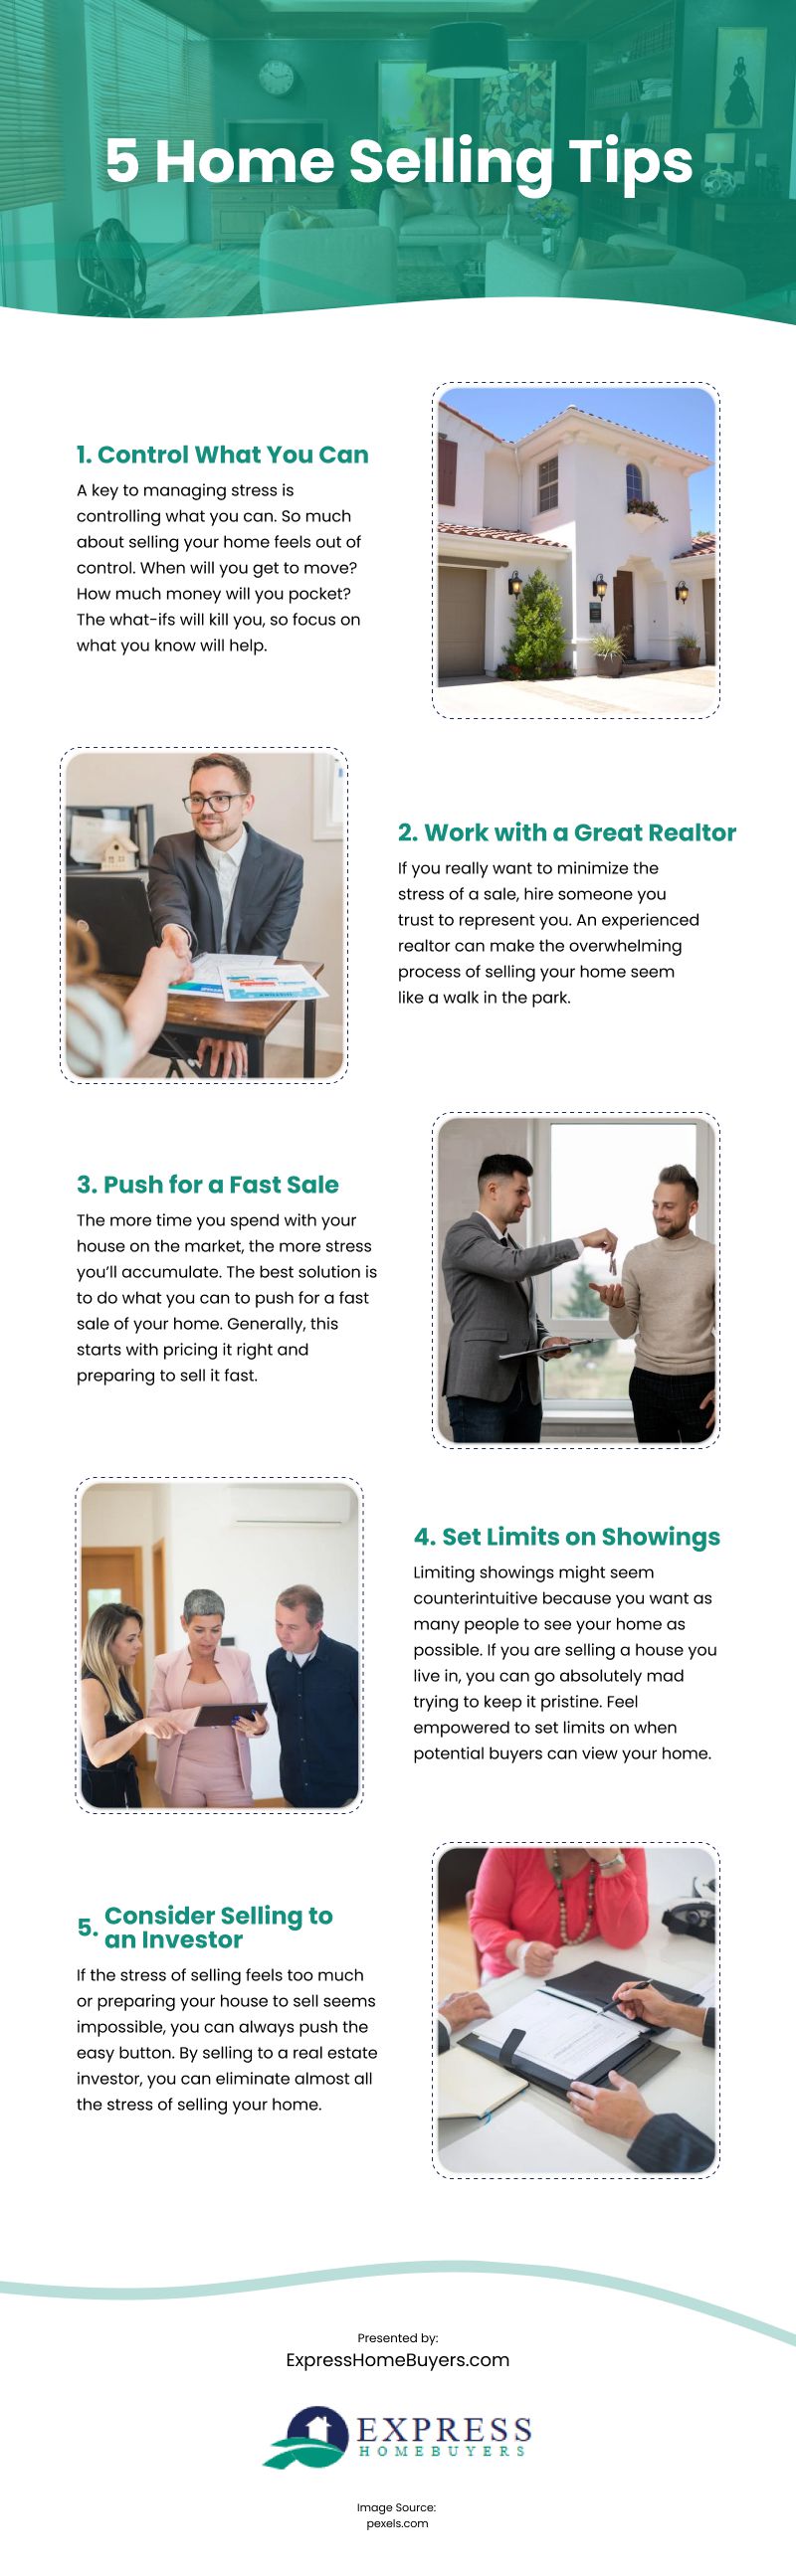 5 Home Selling Tips Infographic